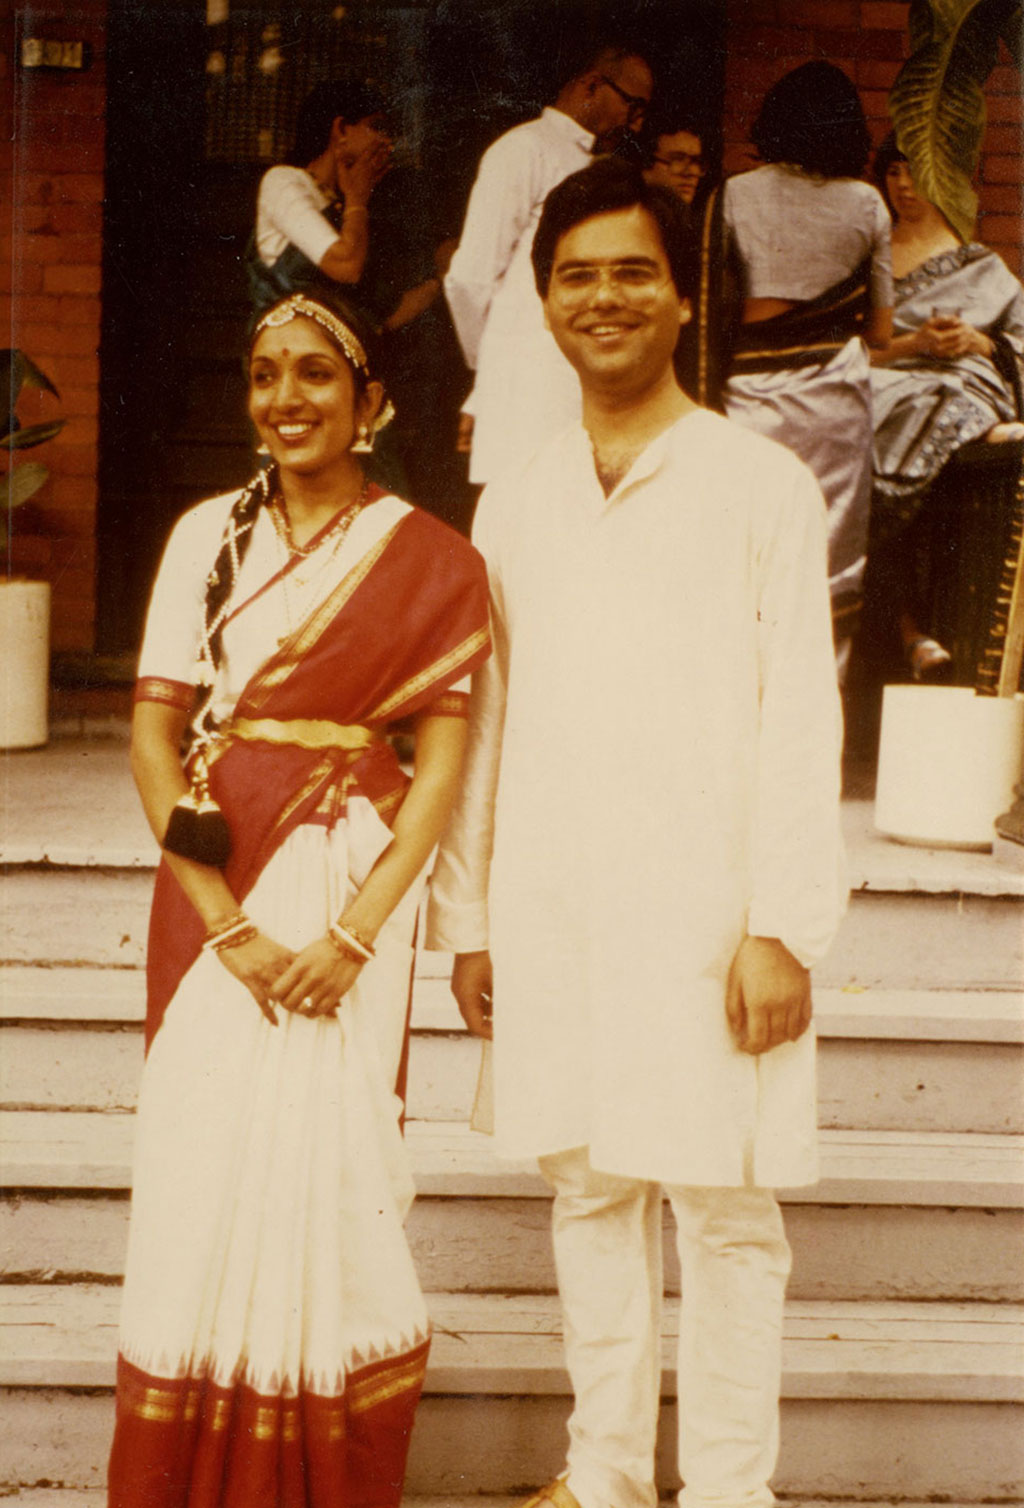 A young couple in traditional Indian clothing stand together, smiling.